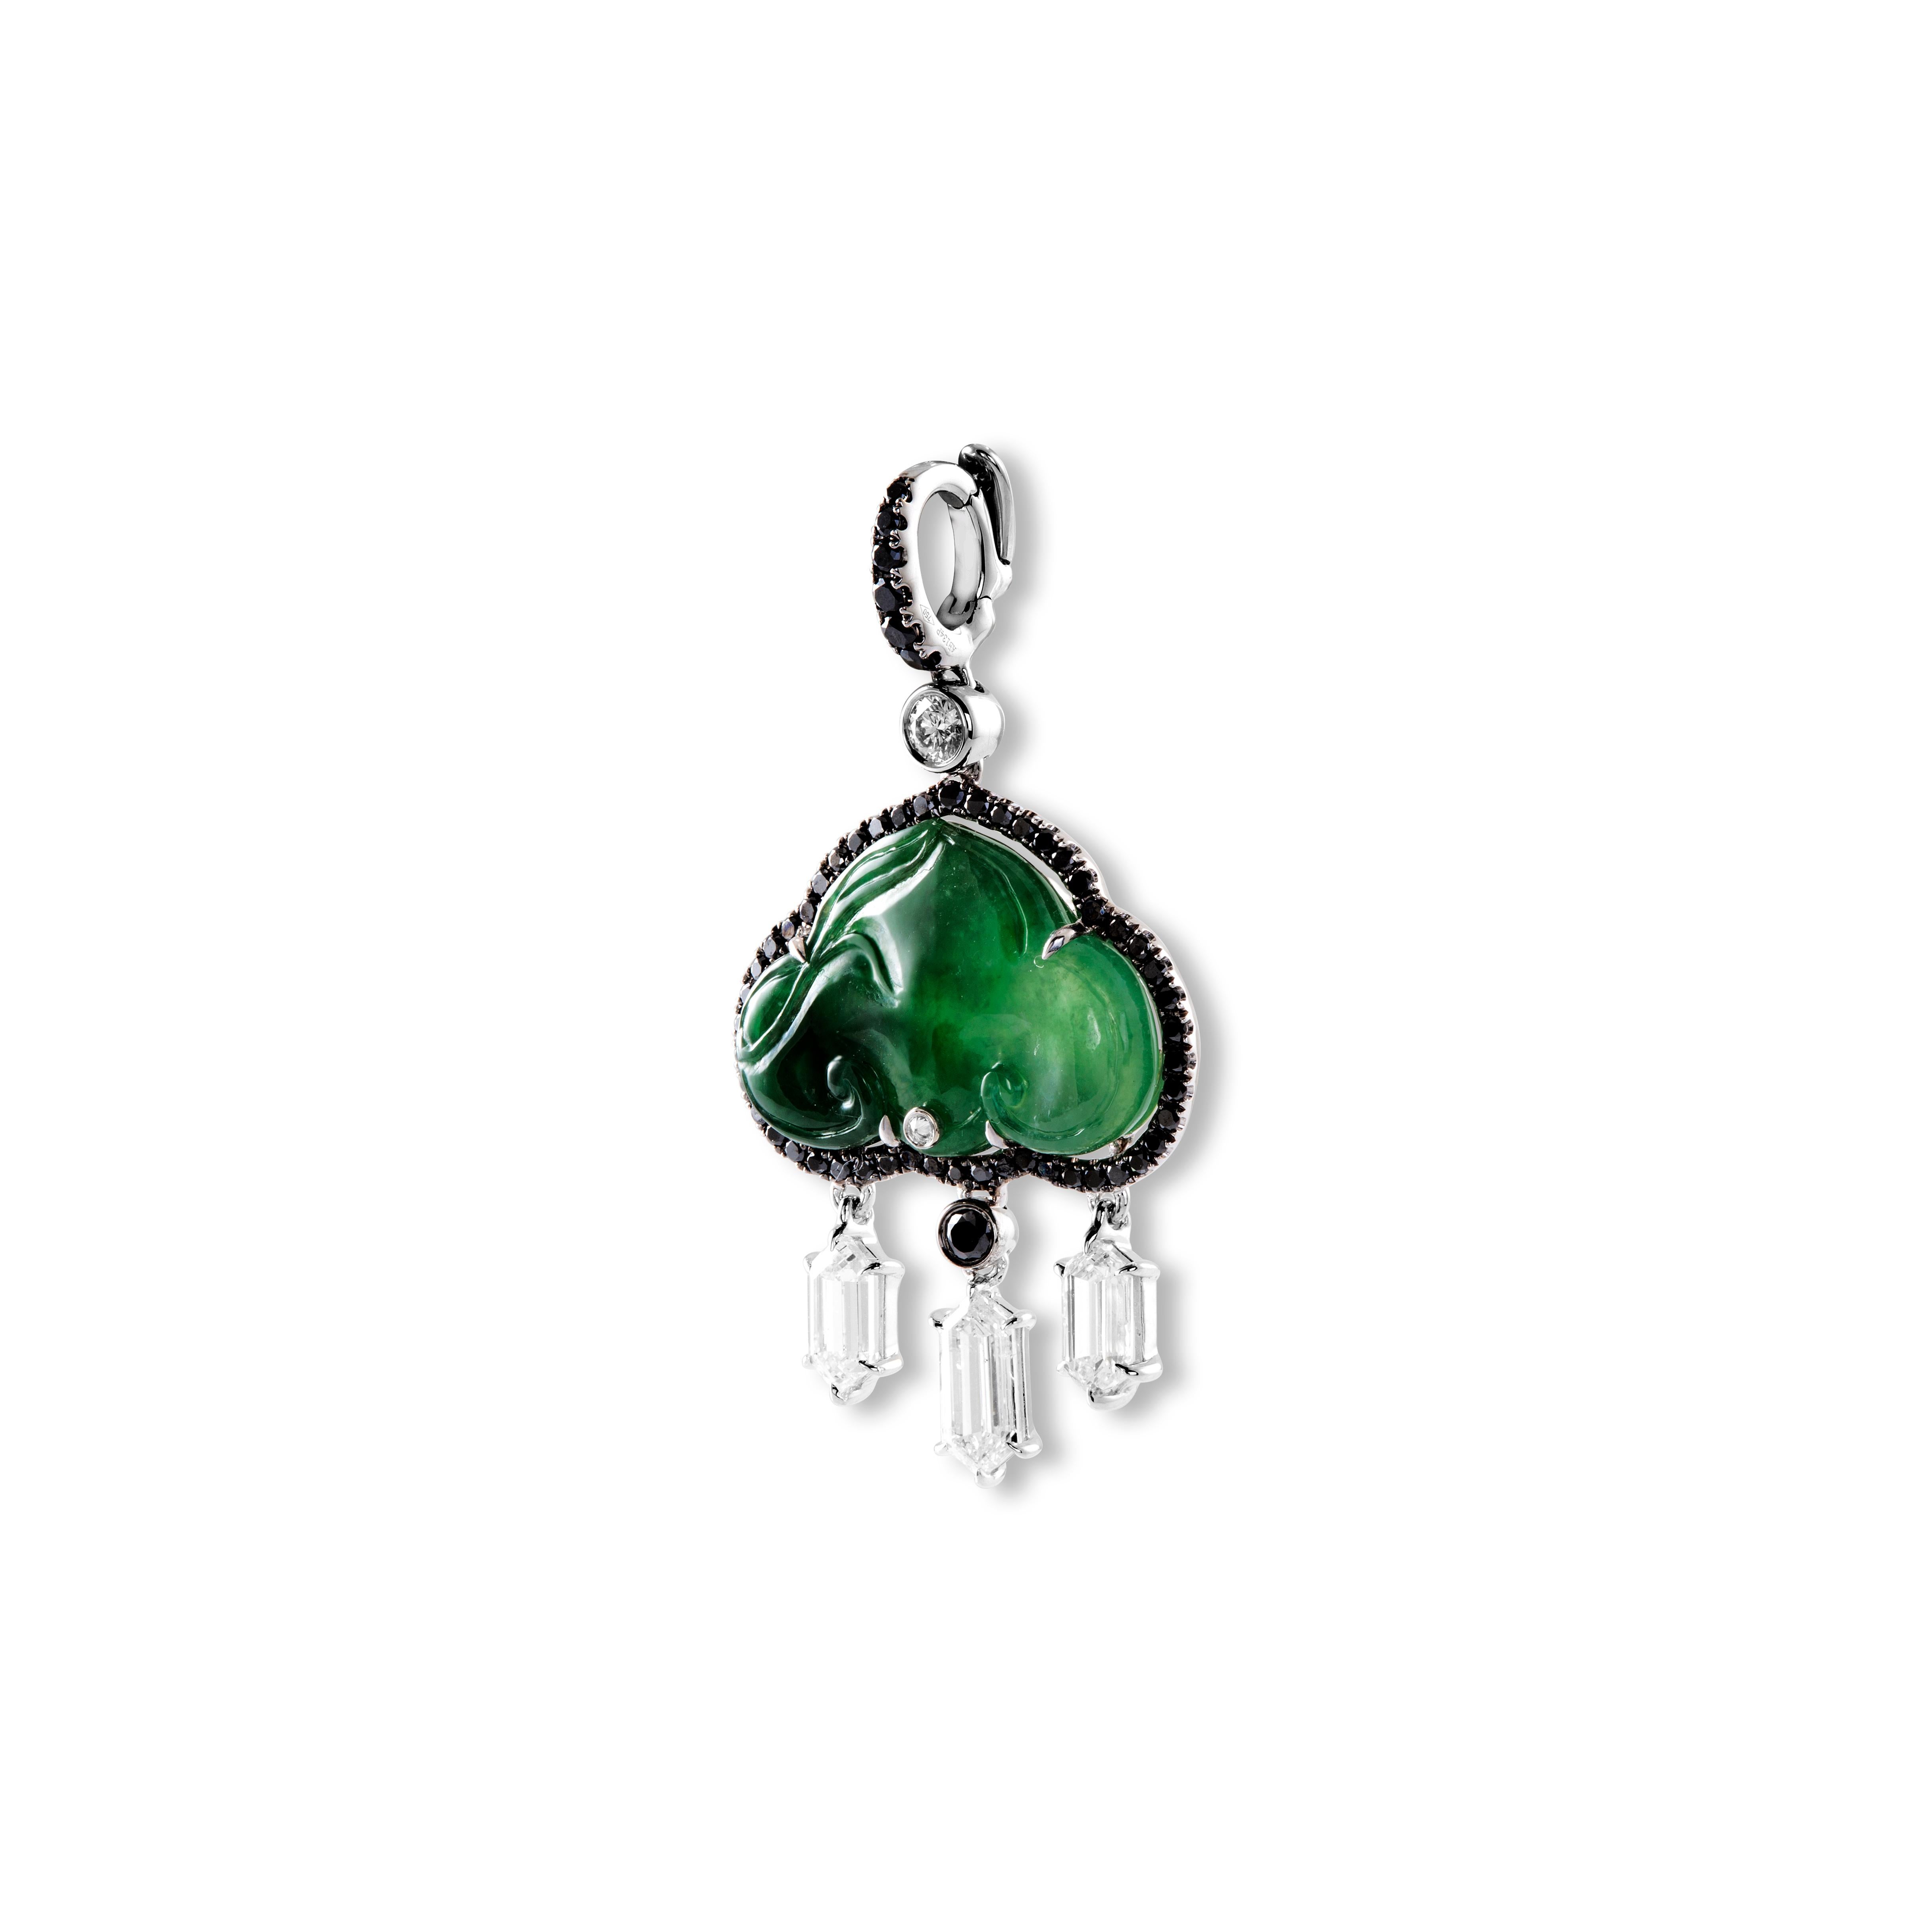 White and Black Diamonds 1.23 cts, 1 Green Clouds Jade 5.67 cts 
